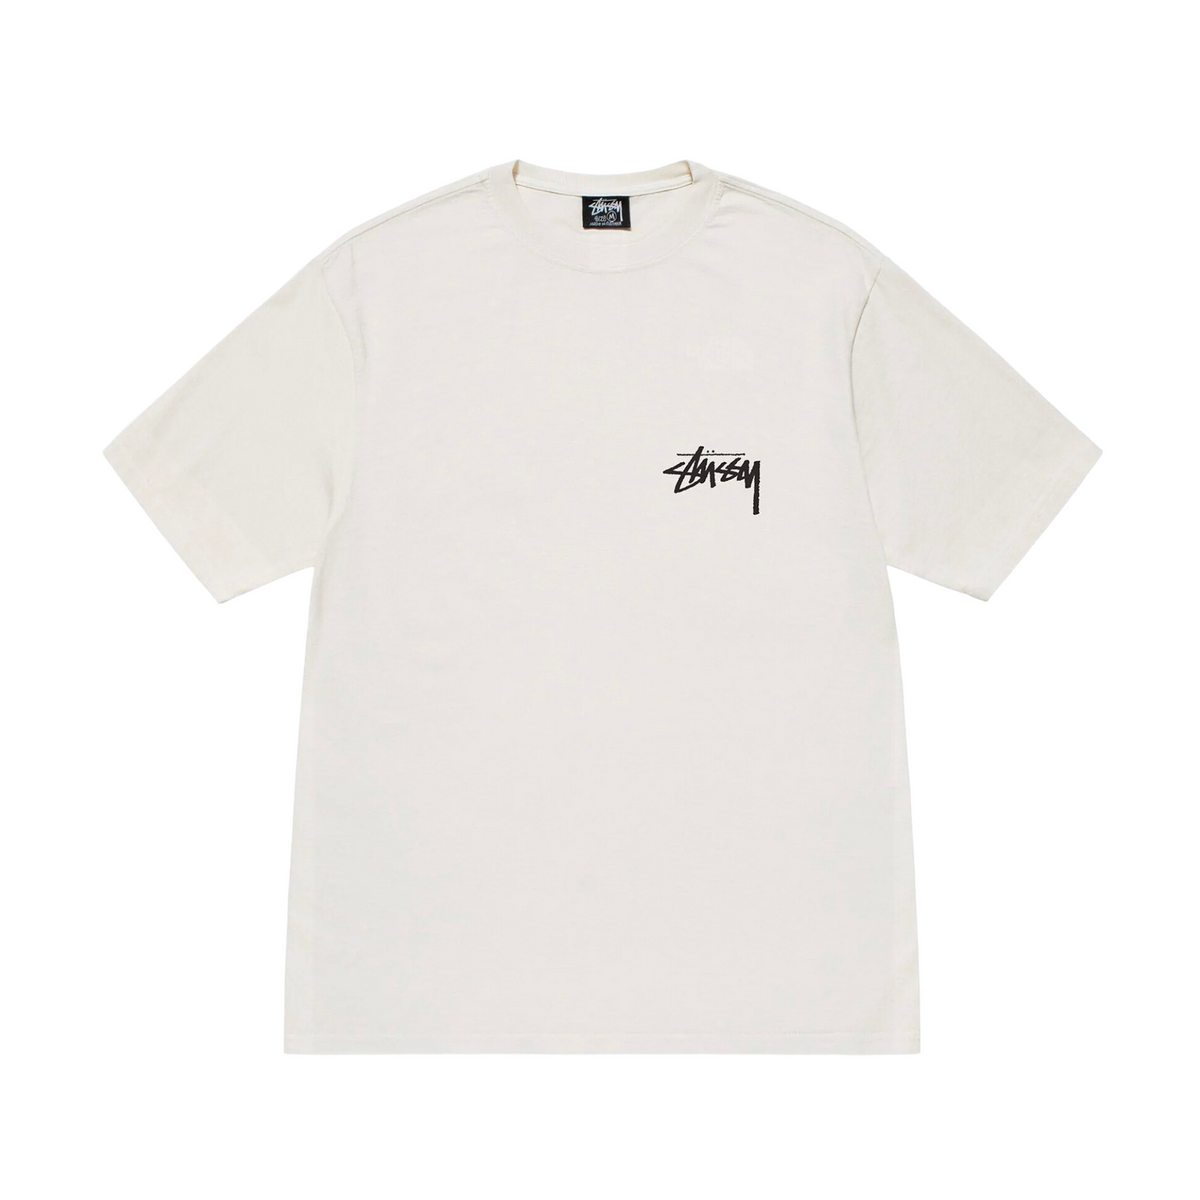 Stüssy We're Livin' Pigment Dyed Tee "White"